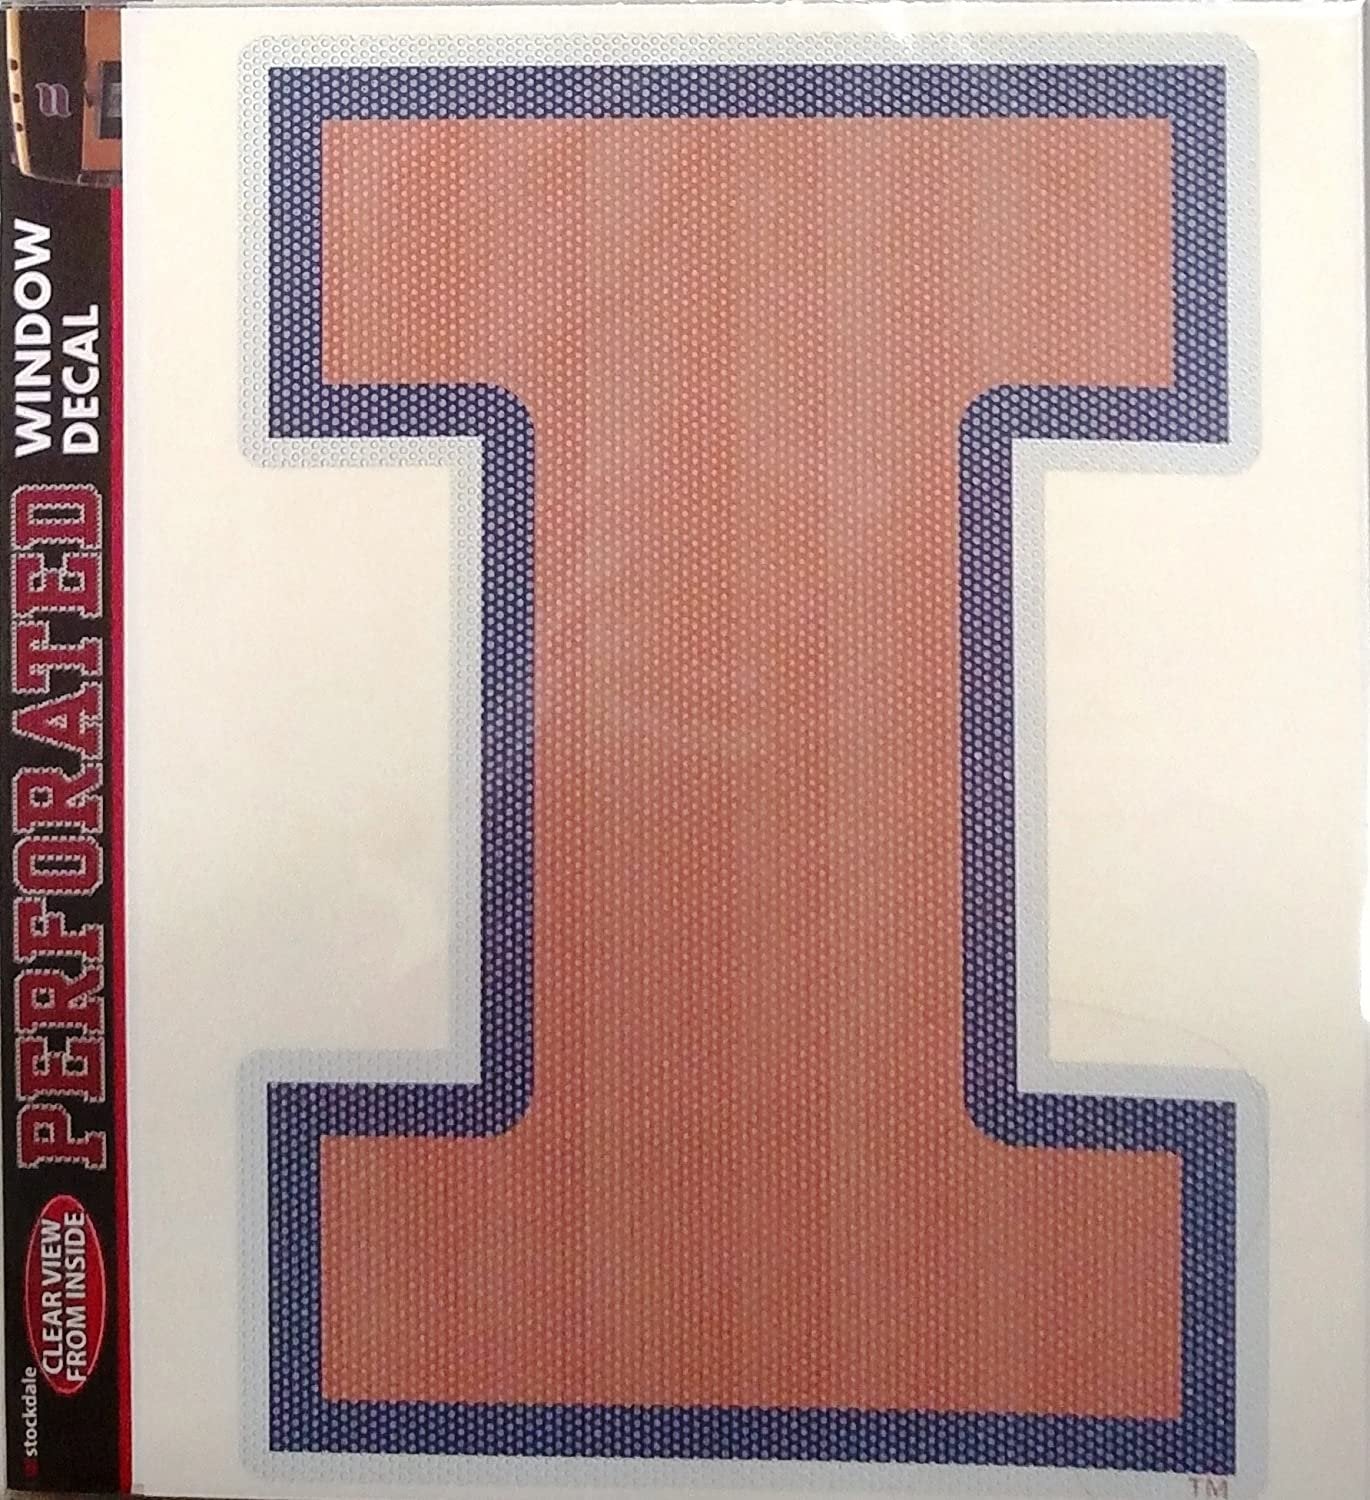 University of Illinois Fighting Illini 12 Inch Perforated Auto Window Film Decal One-Way Vision Exterior Application